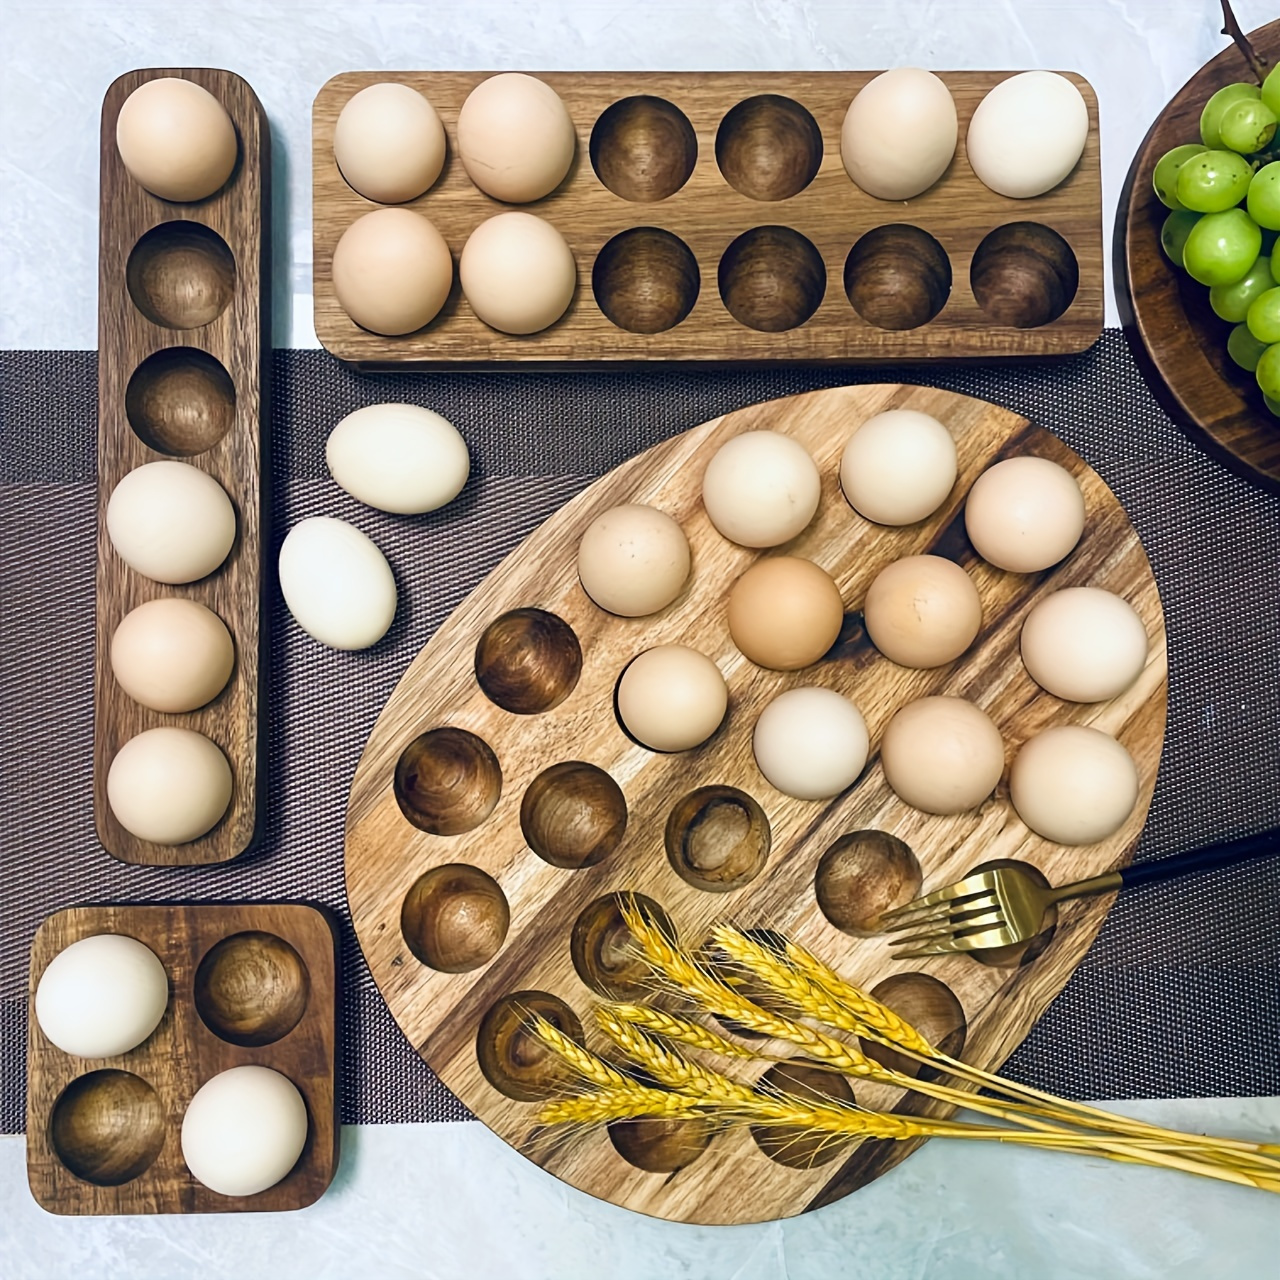 

1pc Multifunctional Acacia Wooden Egg Holder, Reusable Egg Storage Rack With Multiple Holes, Basket-kitchen Cooking Organizer With Lid, For Eggs, Kitchen Supplies